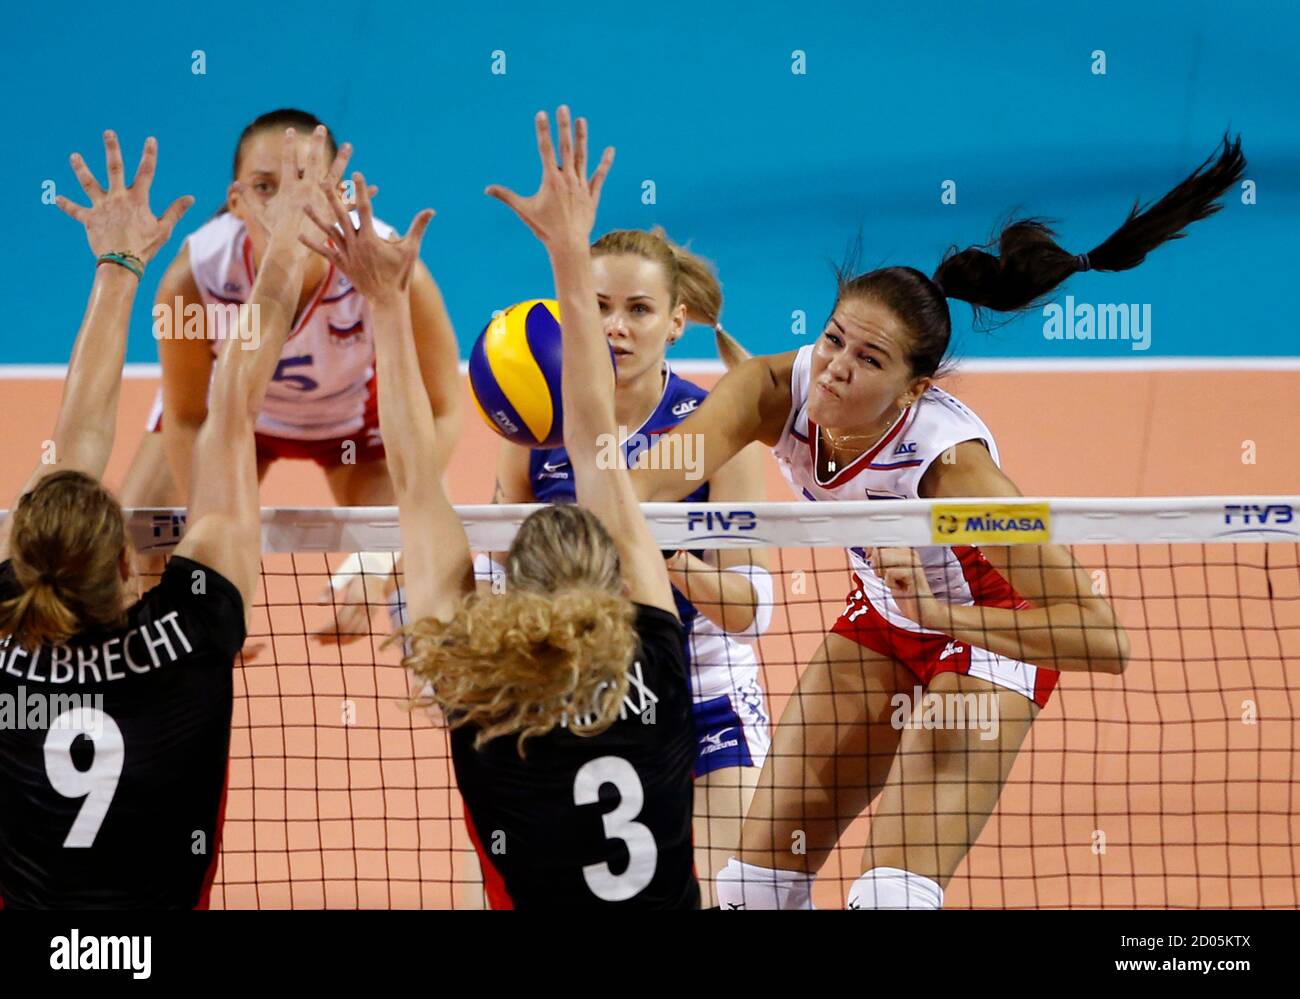 Natalia Malykh (R) of Russia spikes the ball against Frauke Dirickx (C) and  Freya Aelbrecht of Belgium during their FIVB Women's Volleyball World Grand  Prix 2014 final round match in Tokyo August